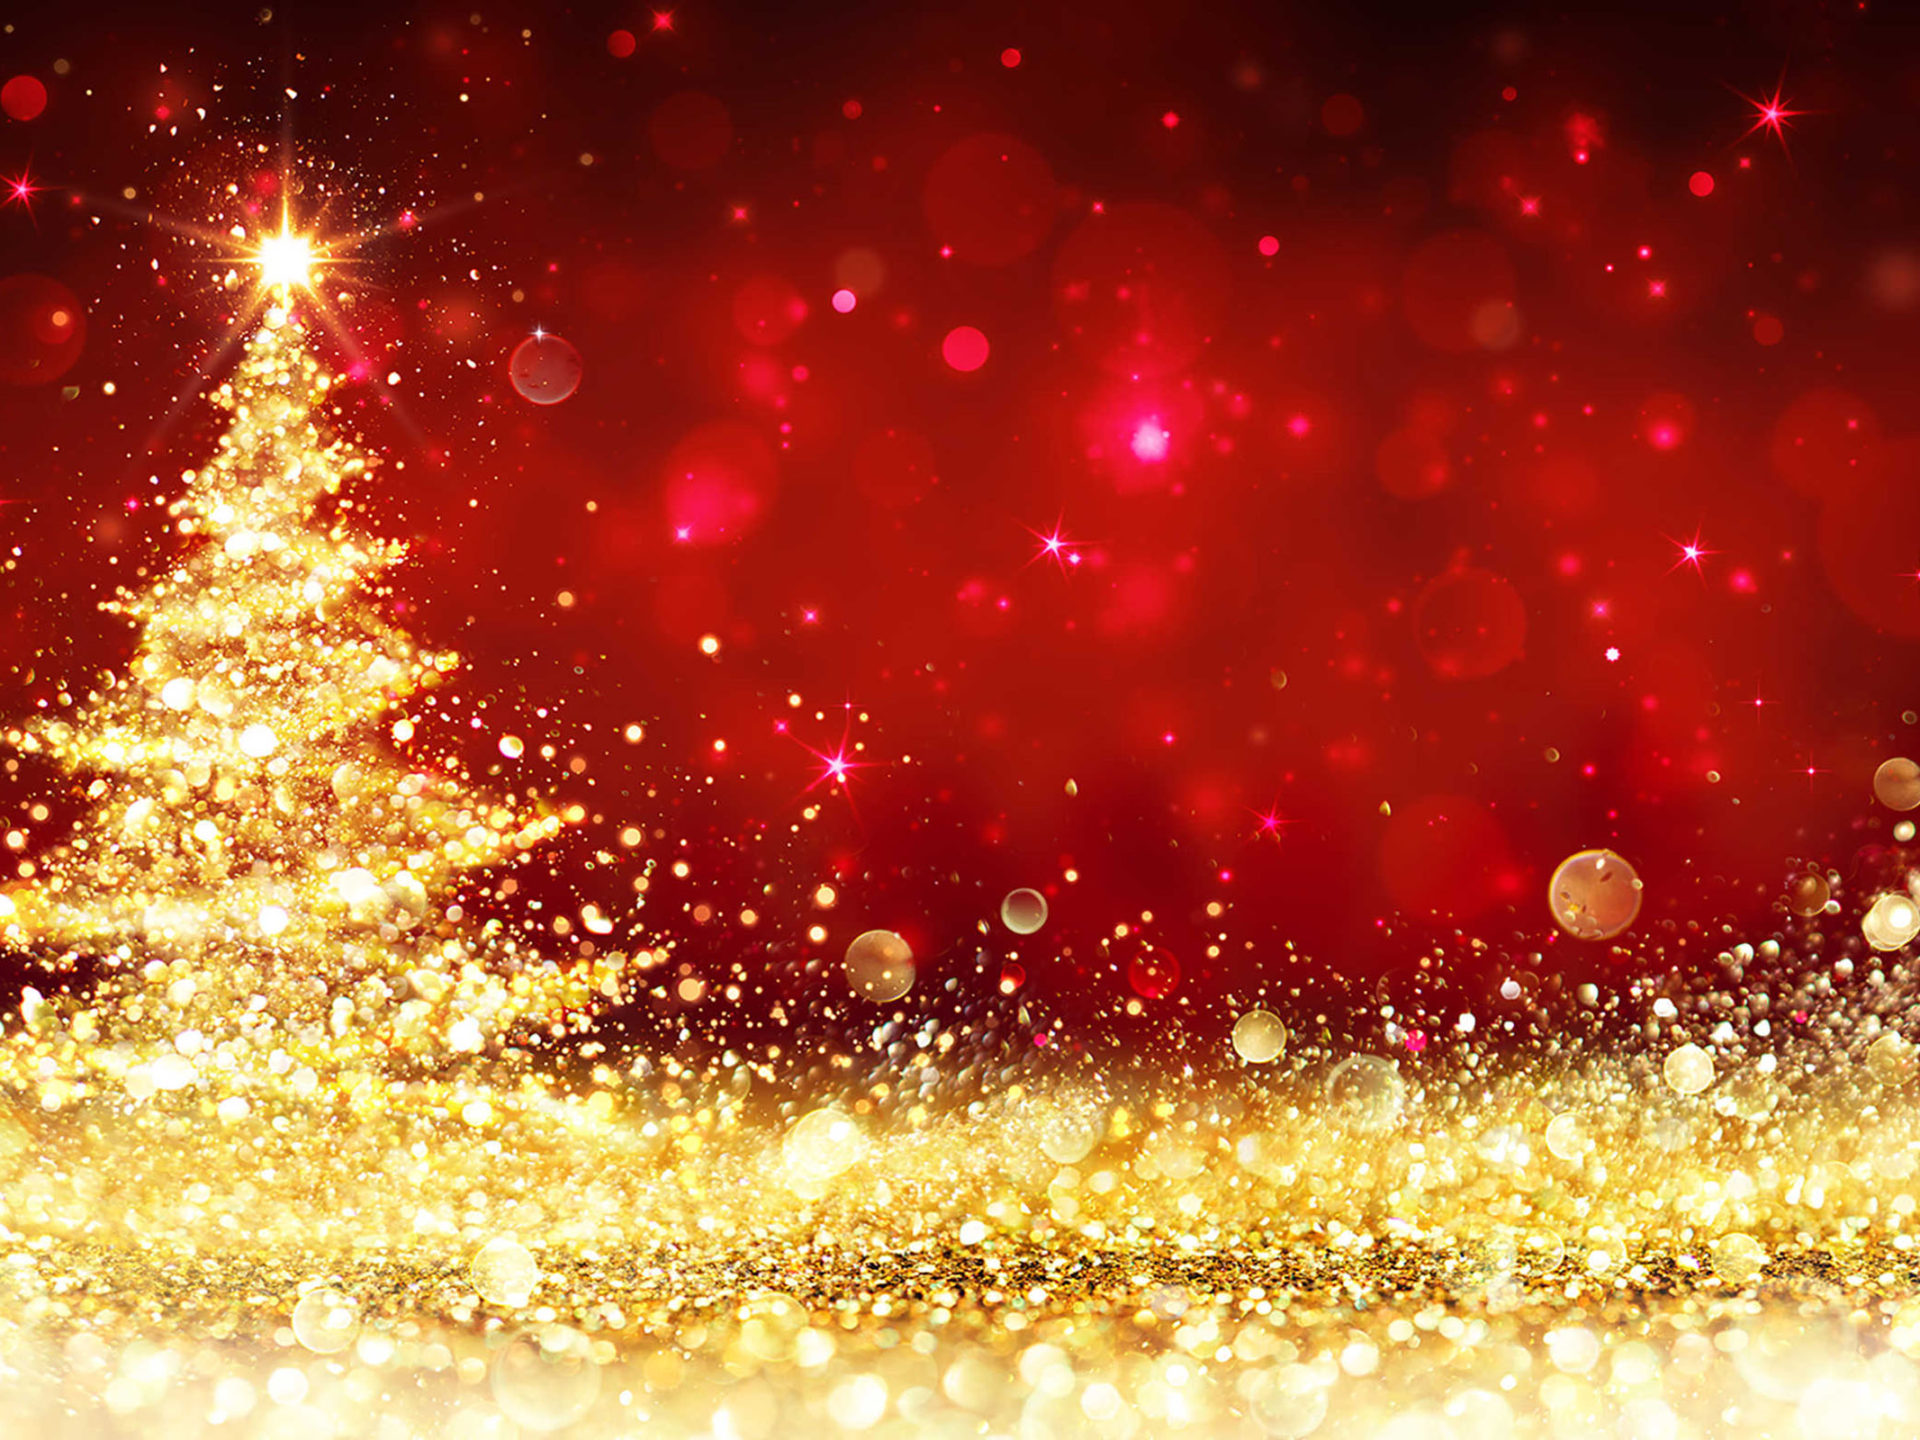 Christmas Tree Red Gold Christmas Background Image, Wallpaper13.com